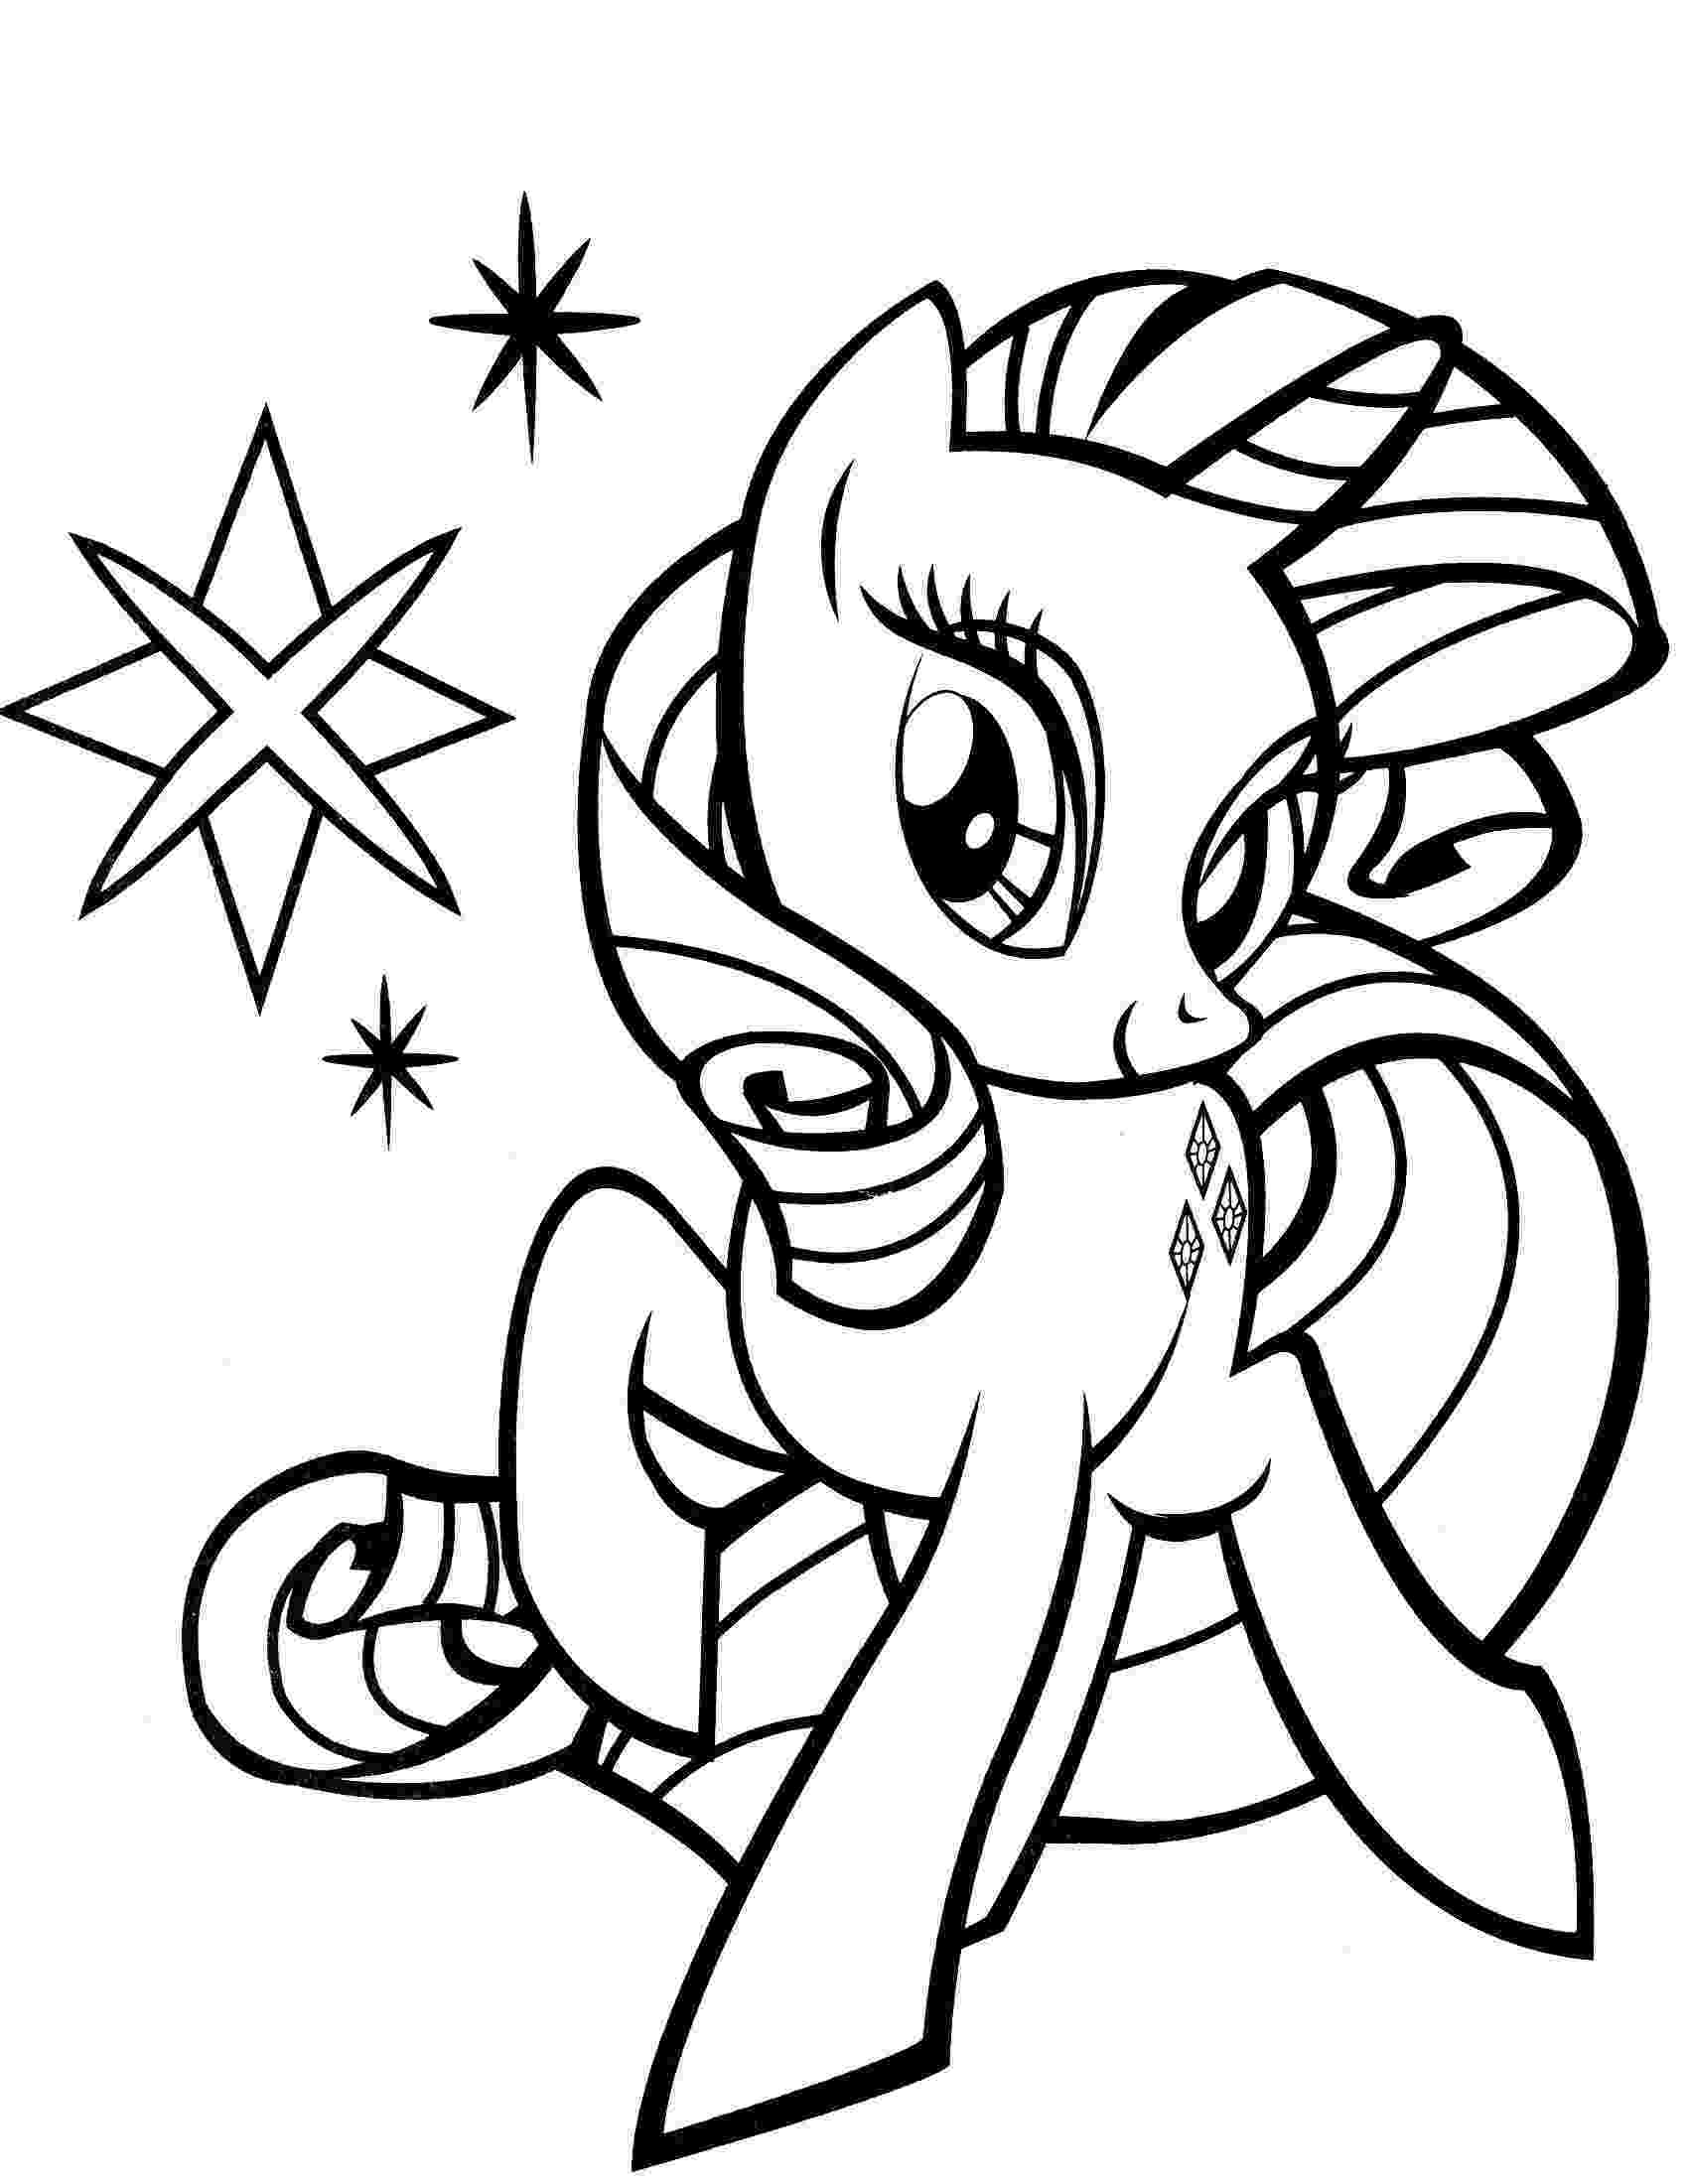 my little pony printable pictures my little pony printable black and white by little pony pictures my printable 